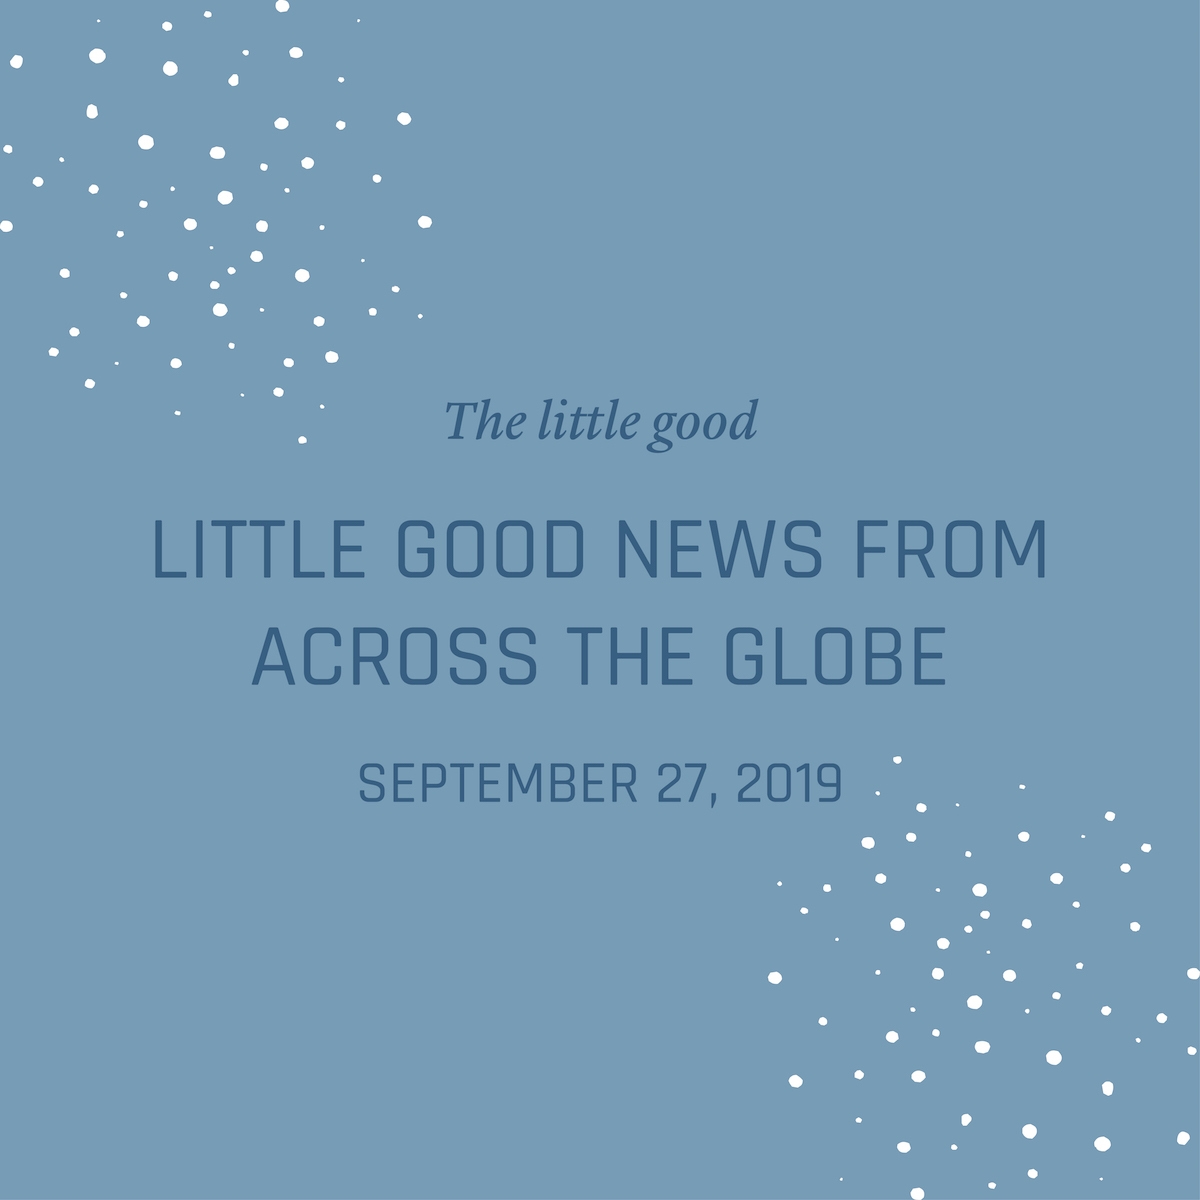 Good Happy Environment Eco News of the Week - Nowhere & Everywhere Good News Stories 2019